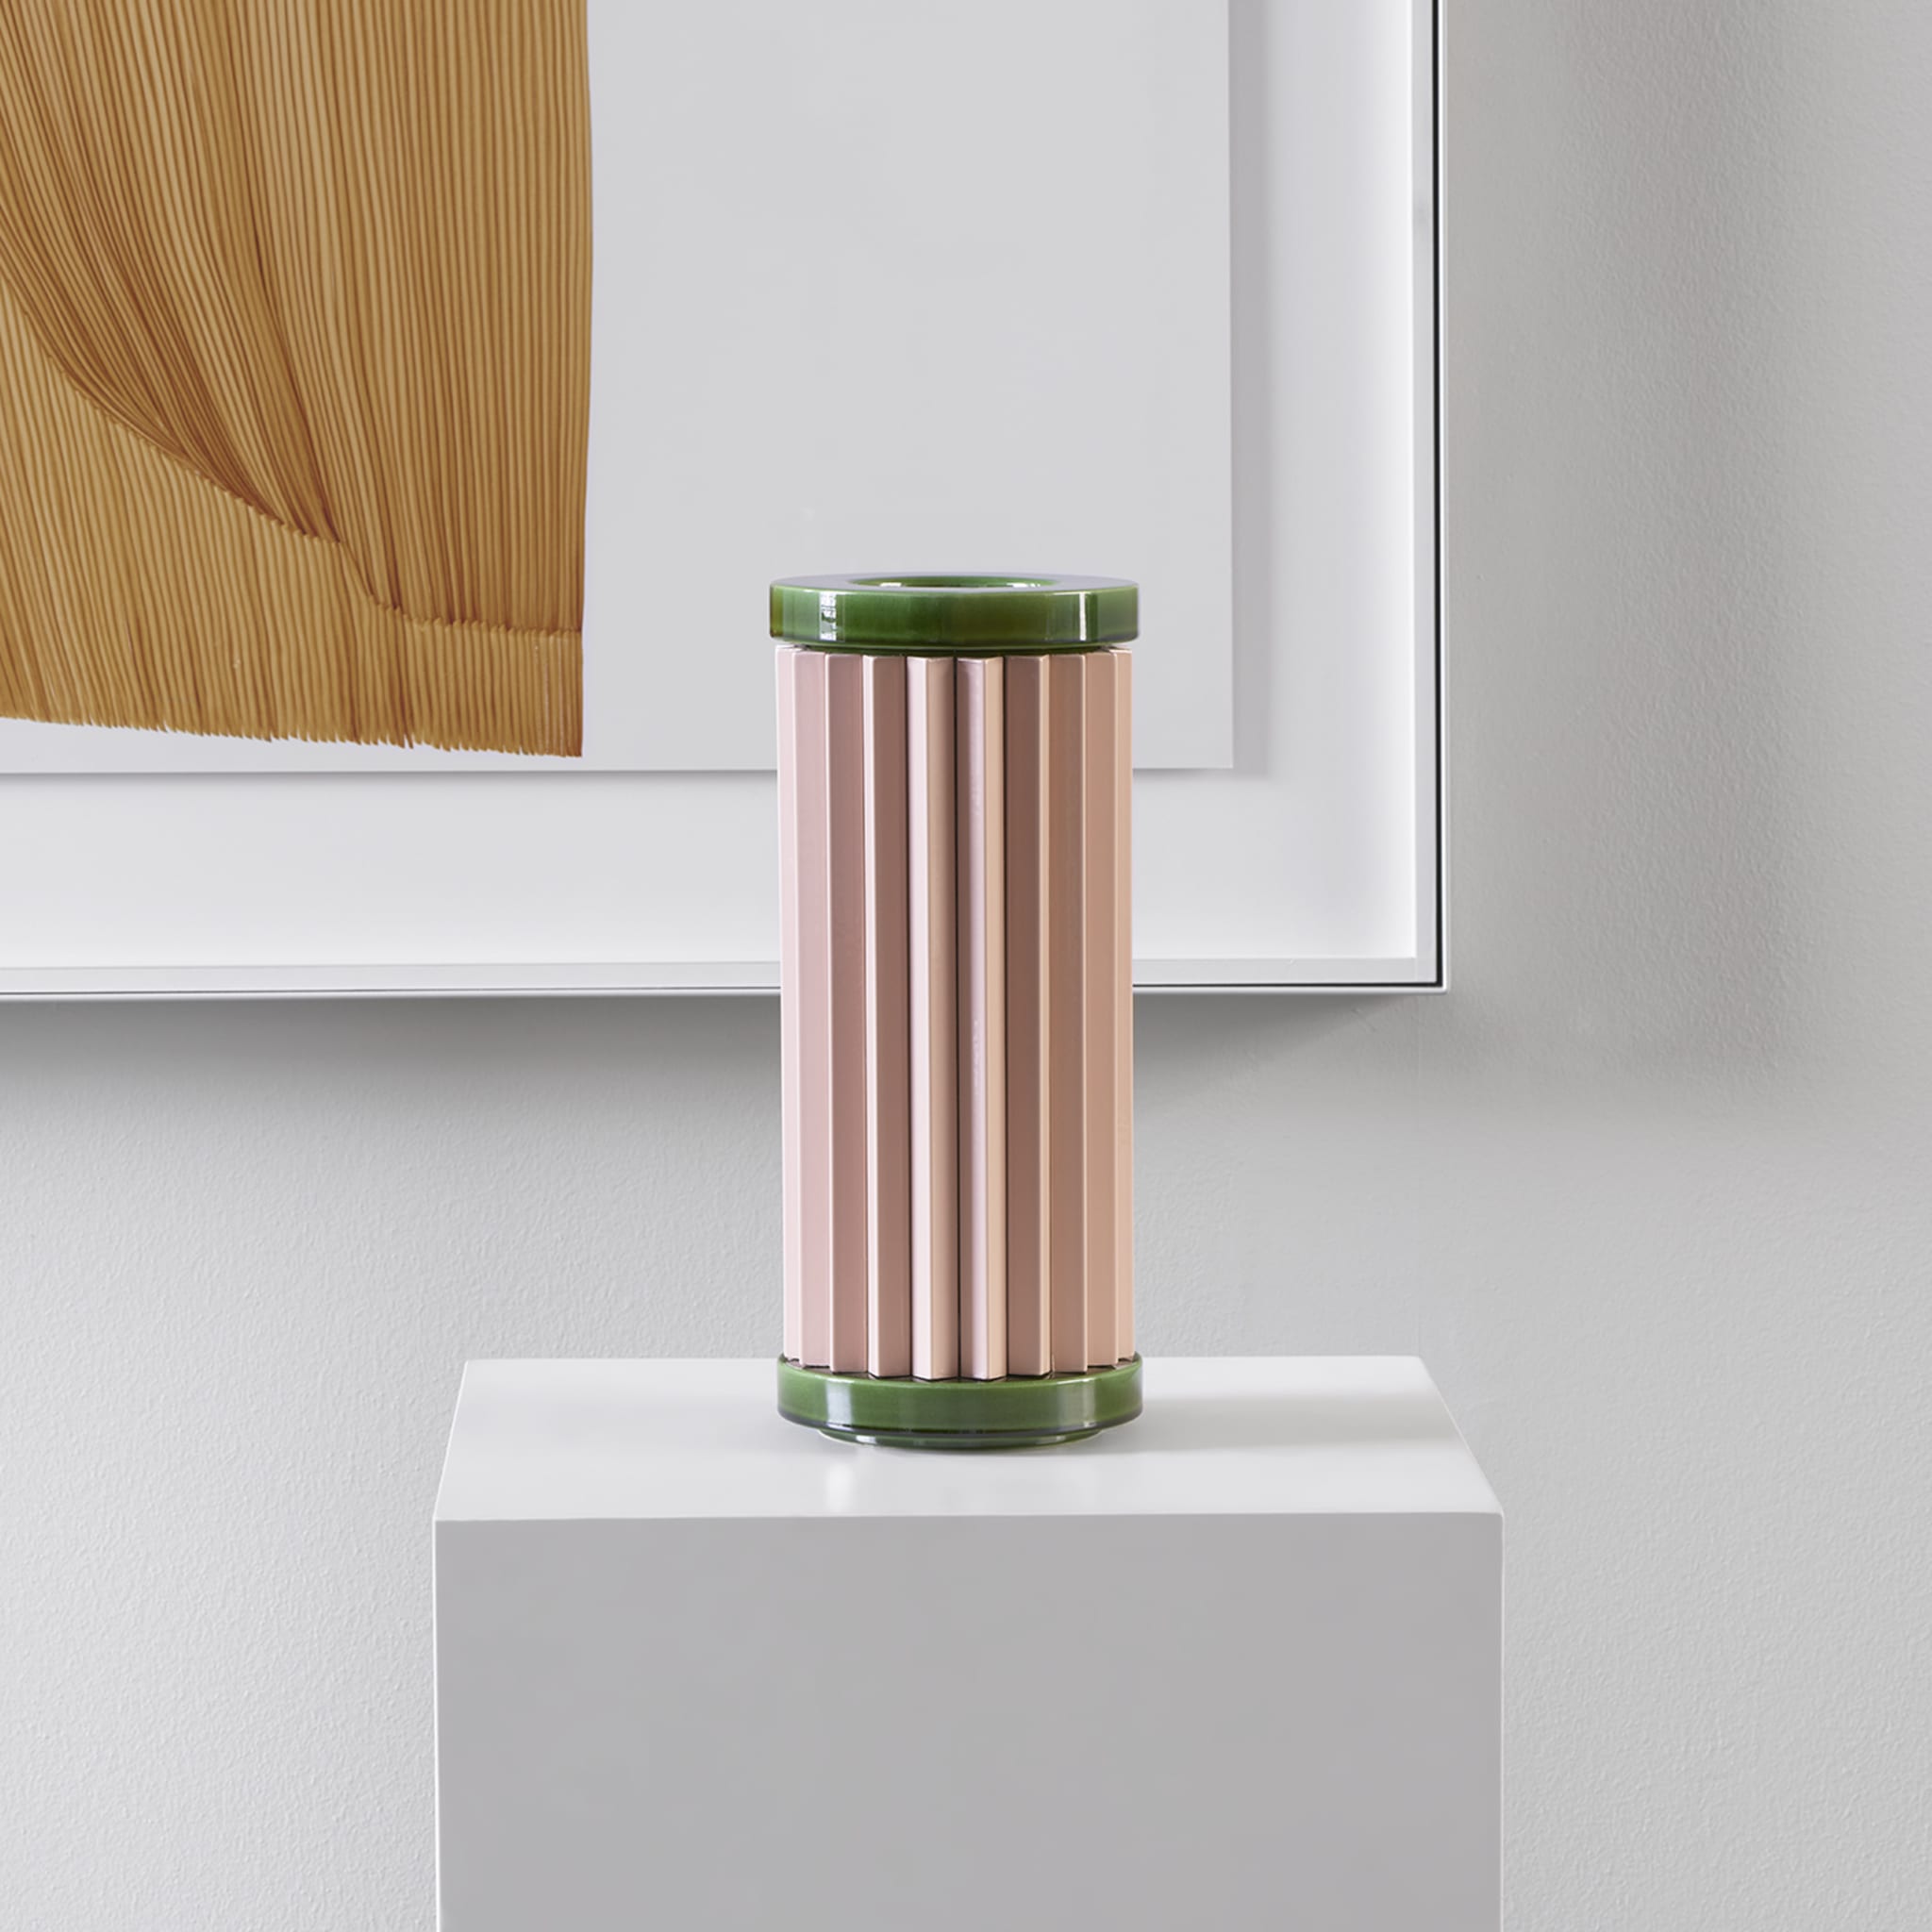 Rombini A Green and Rose Vase by Ronan & Erwan Bouroullec - Alternative view 2